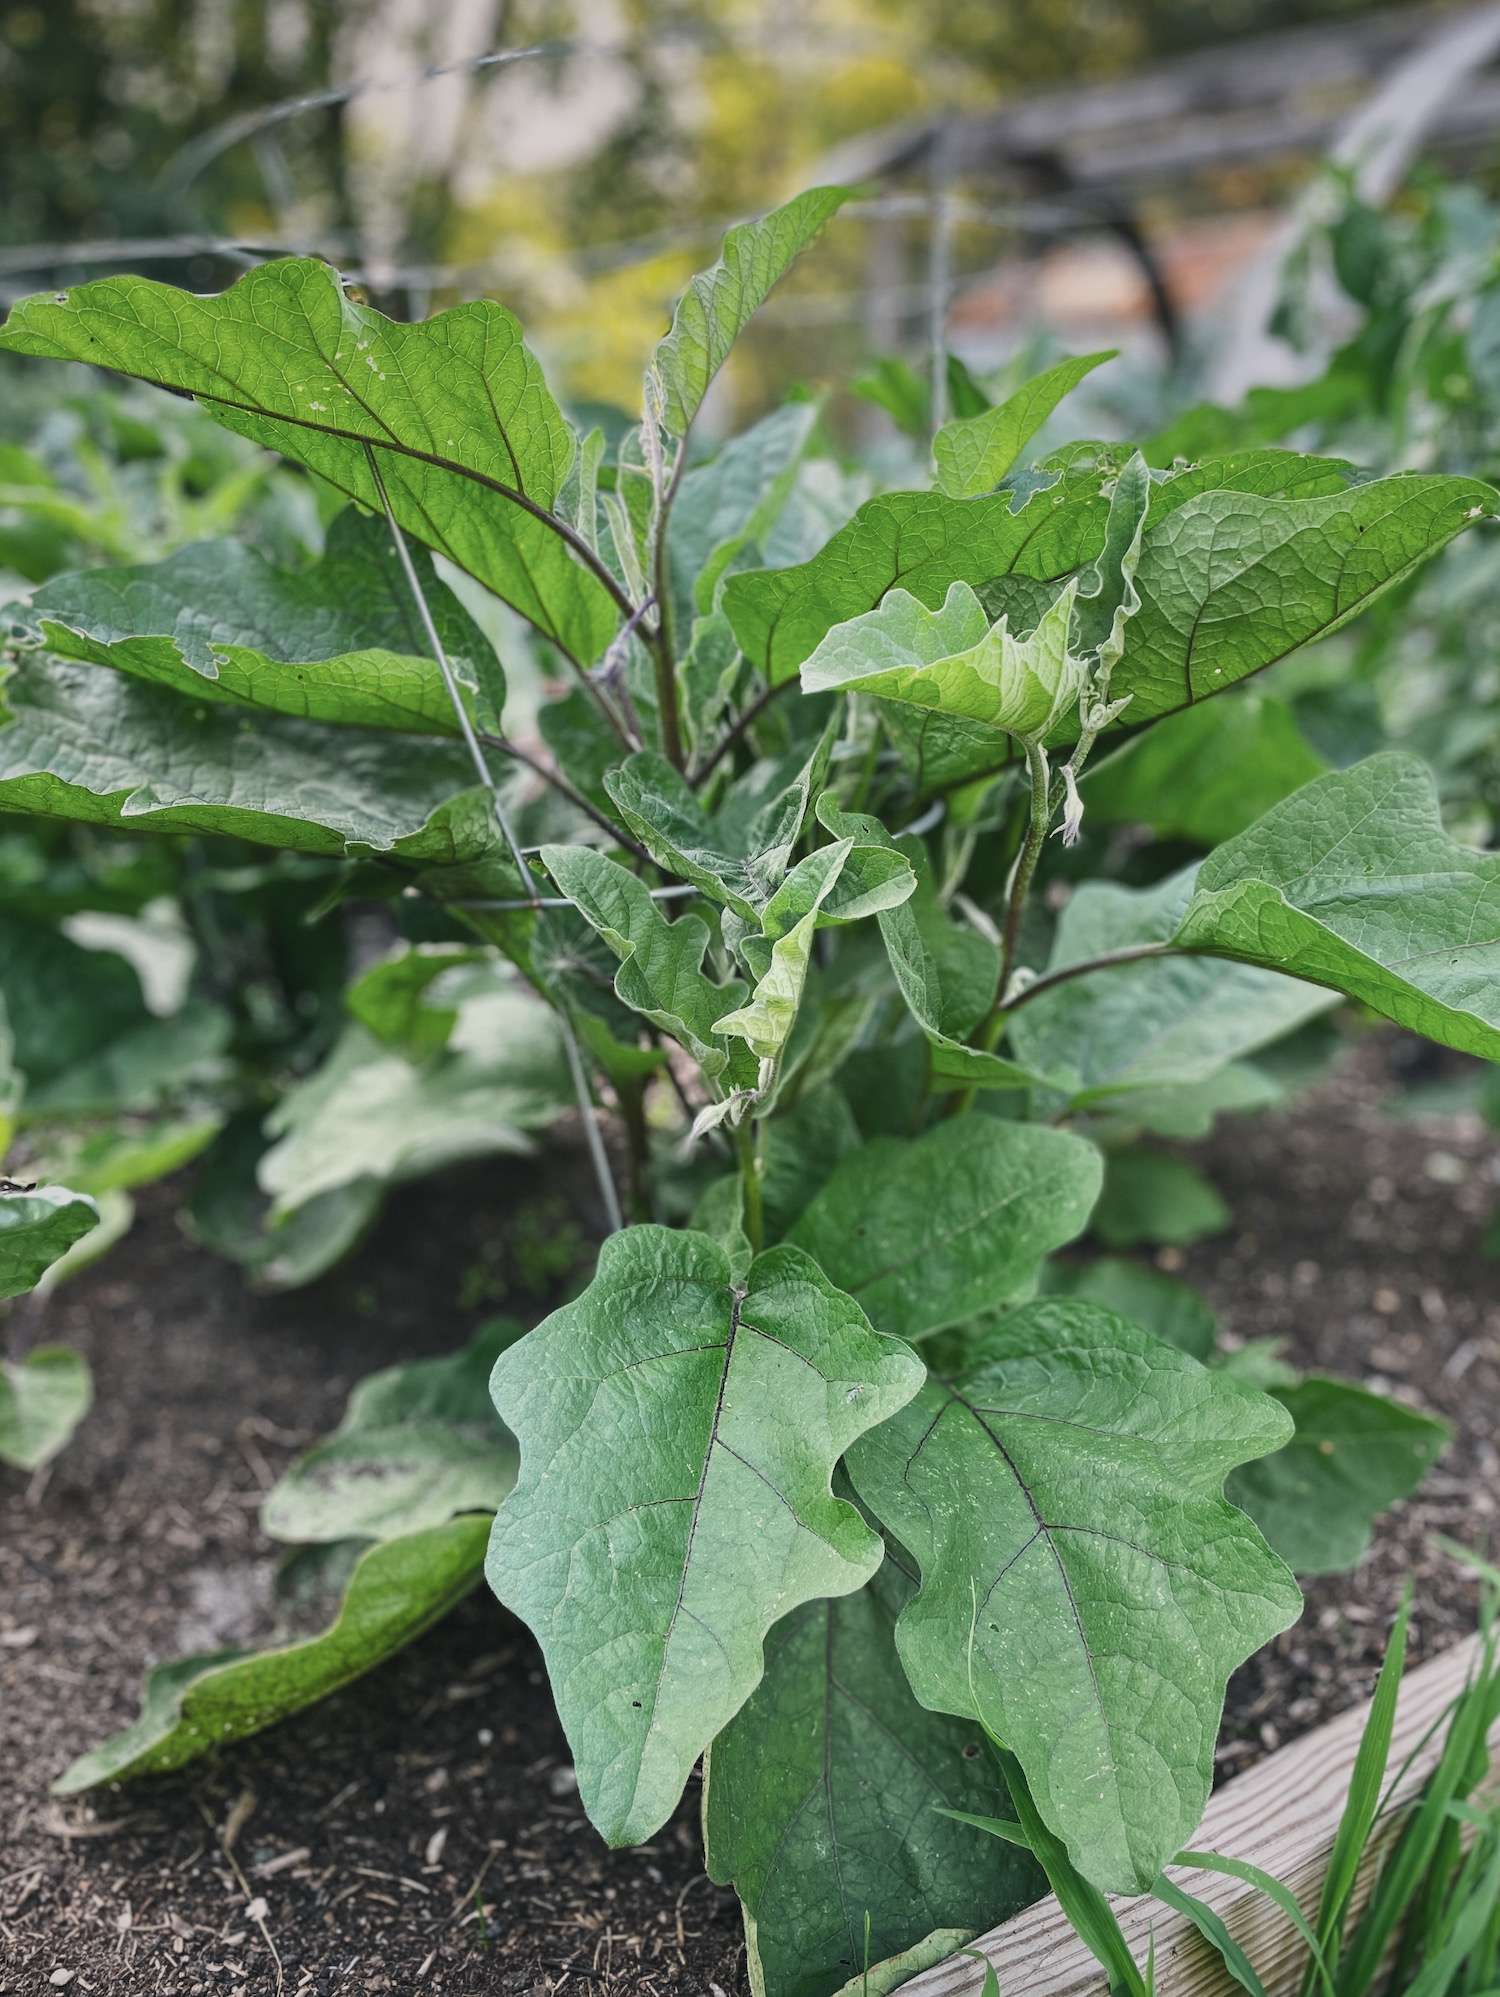 A photo of a healthy eggplant in the garden